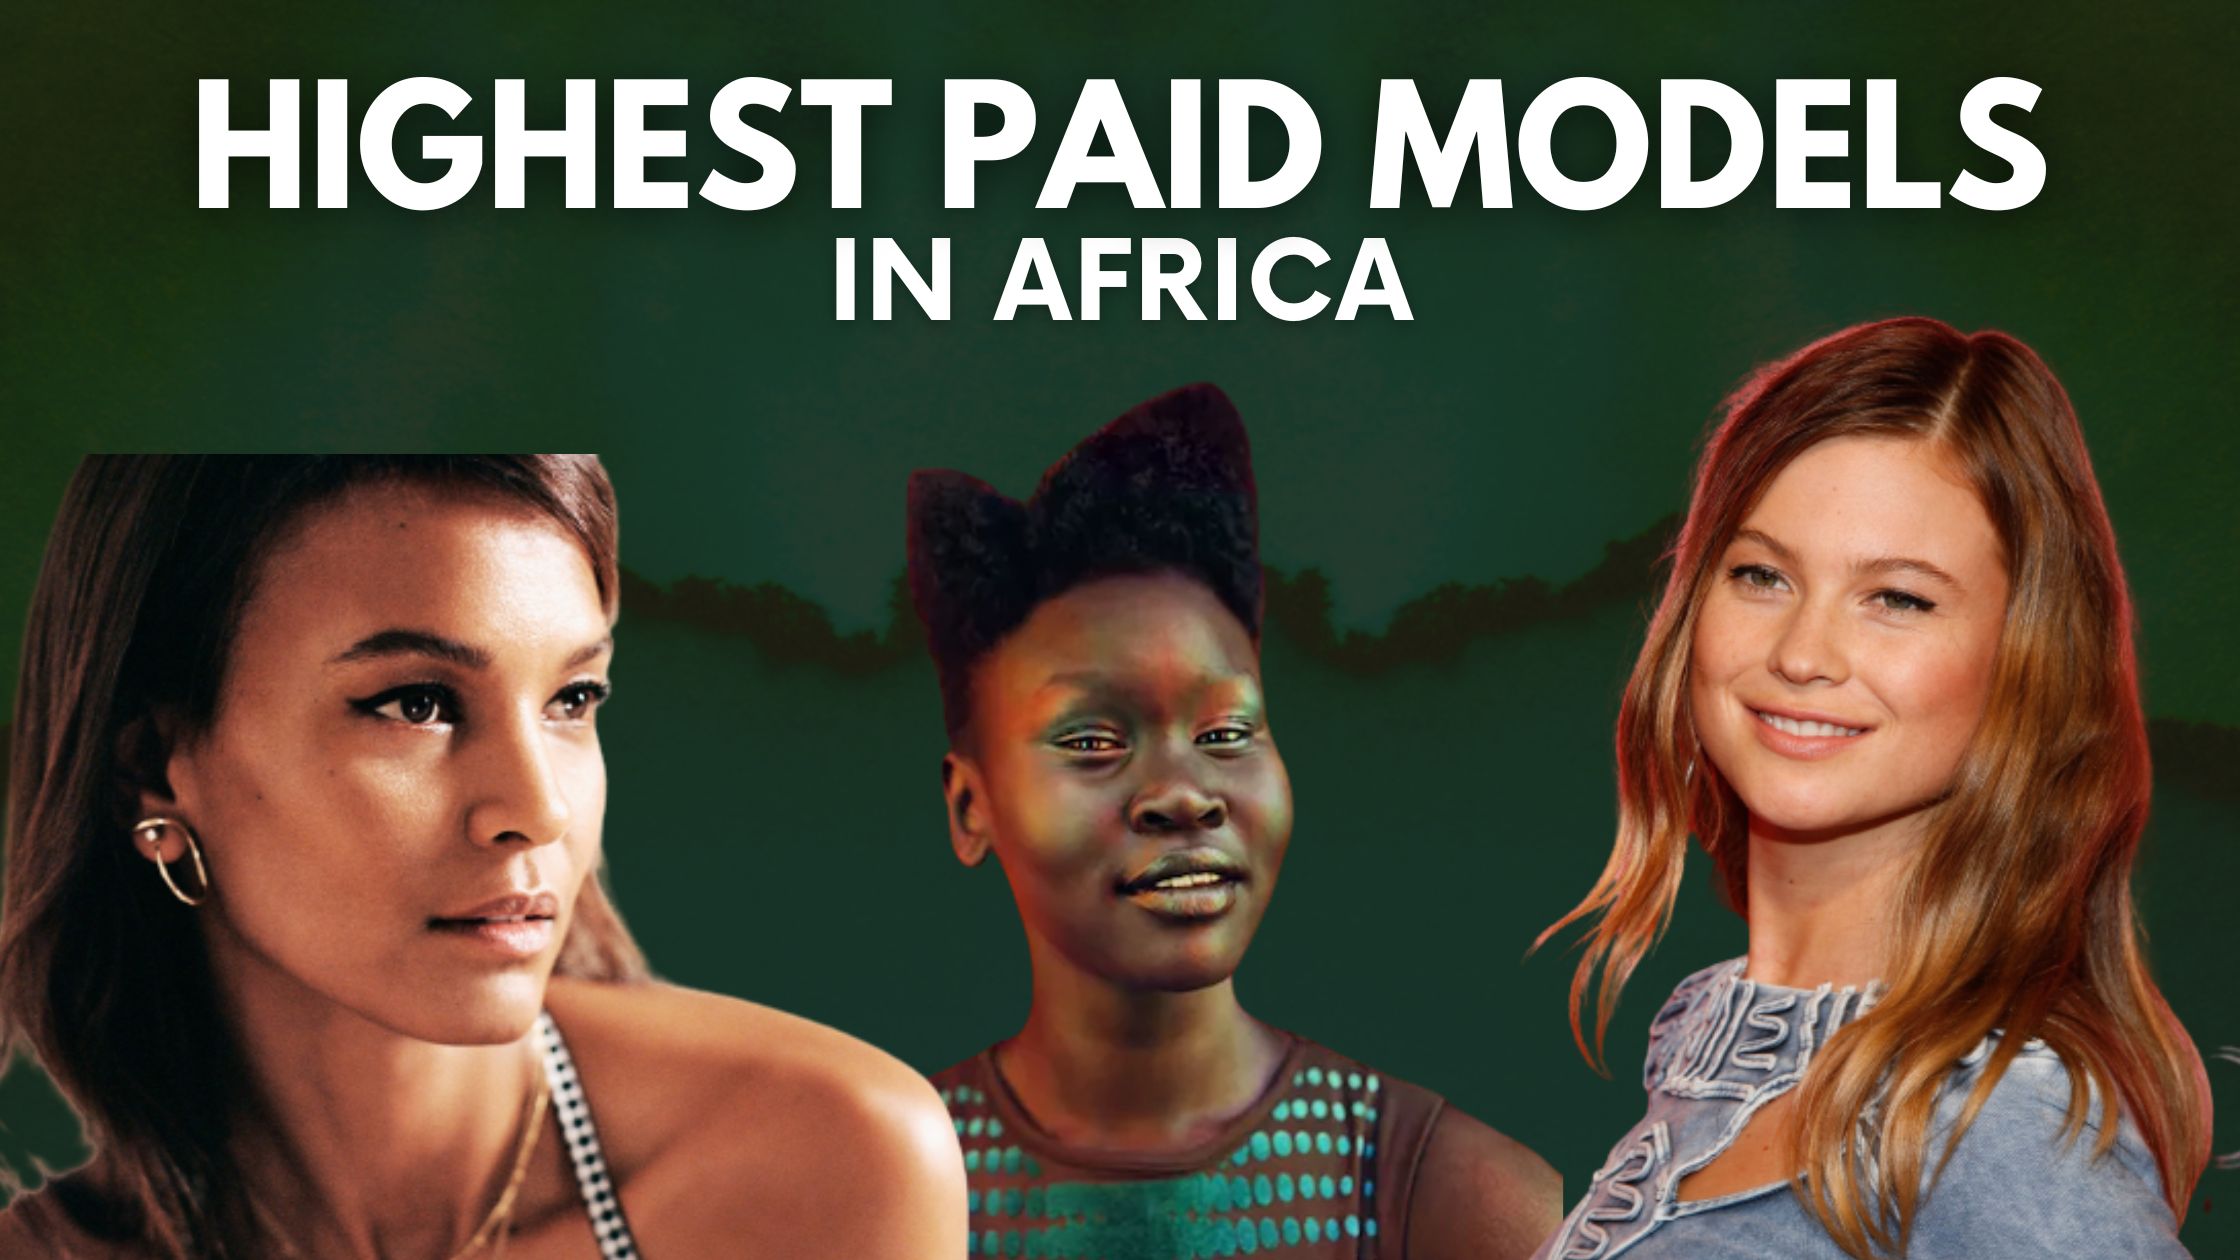 Top 5 Highest Paid Models In Africa (2022)